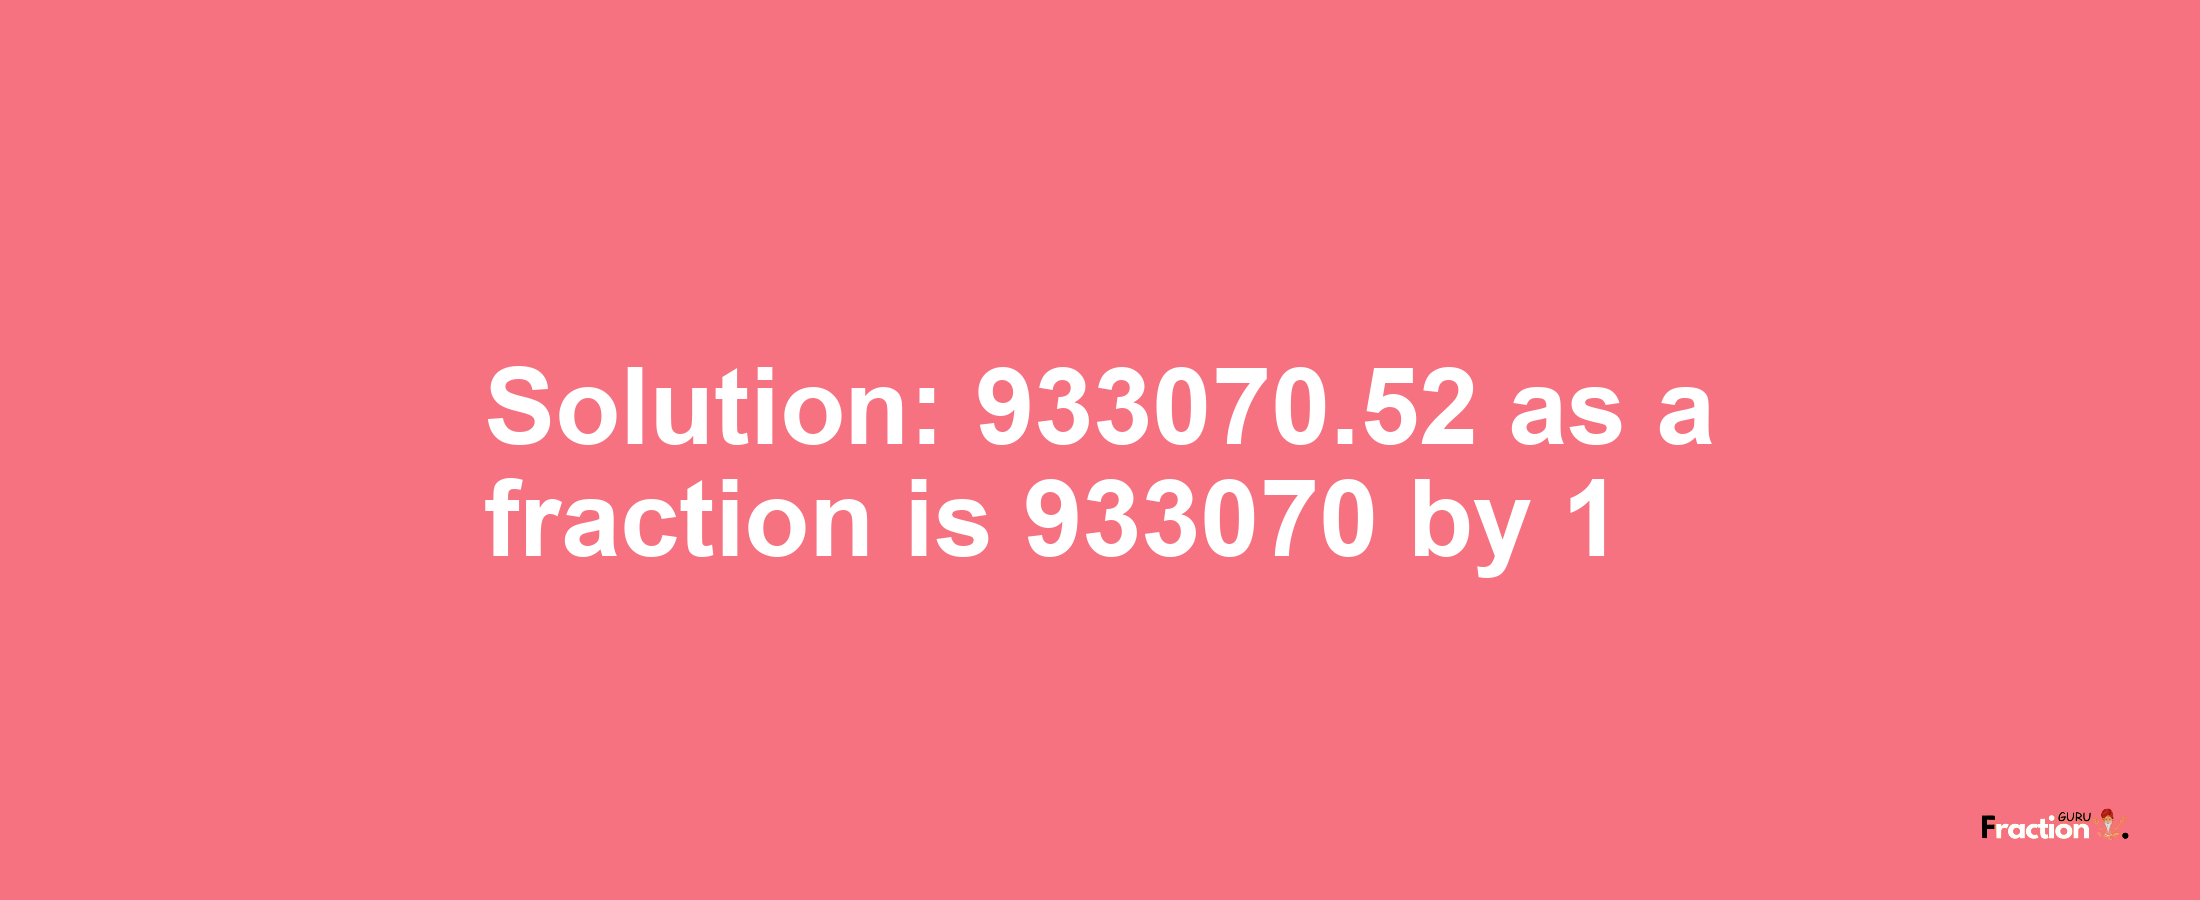 Solution:933070.52 as a fraction is 933070/1